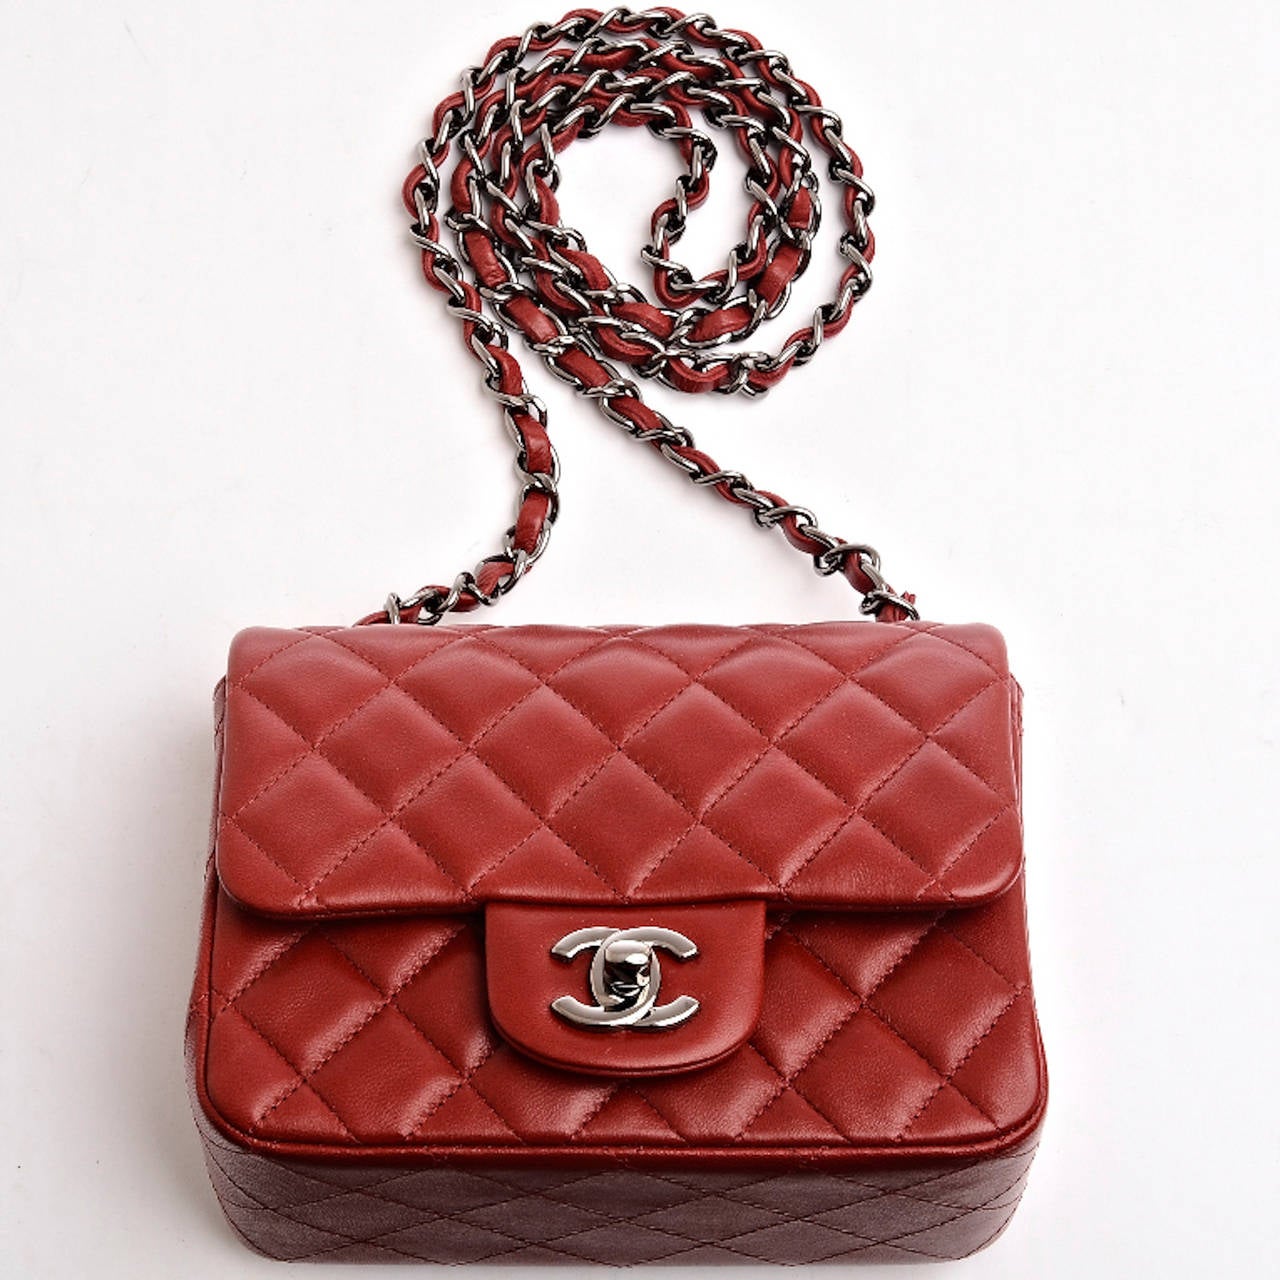 Women's Chanel Dark Red Quilted Lambskin Mini Classic Flap Bag